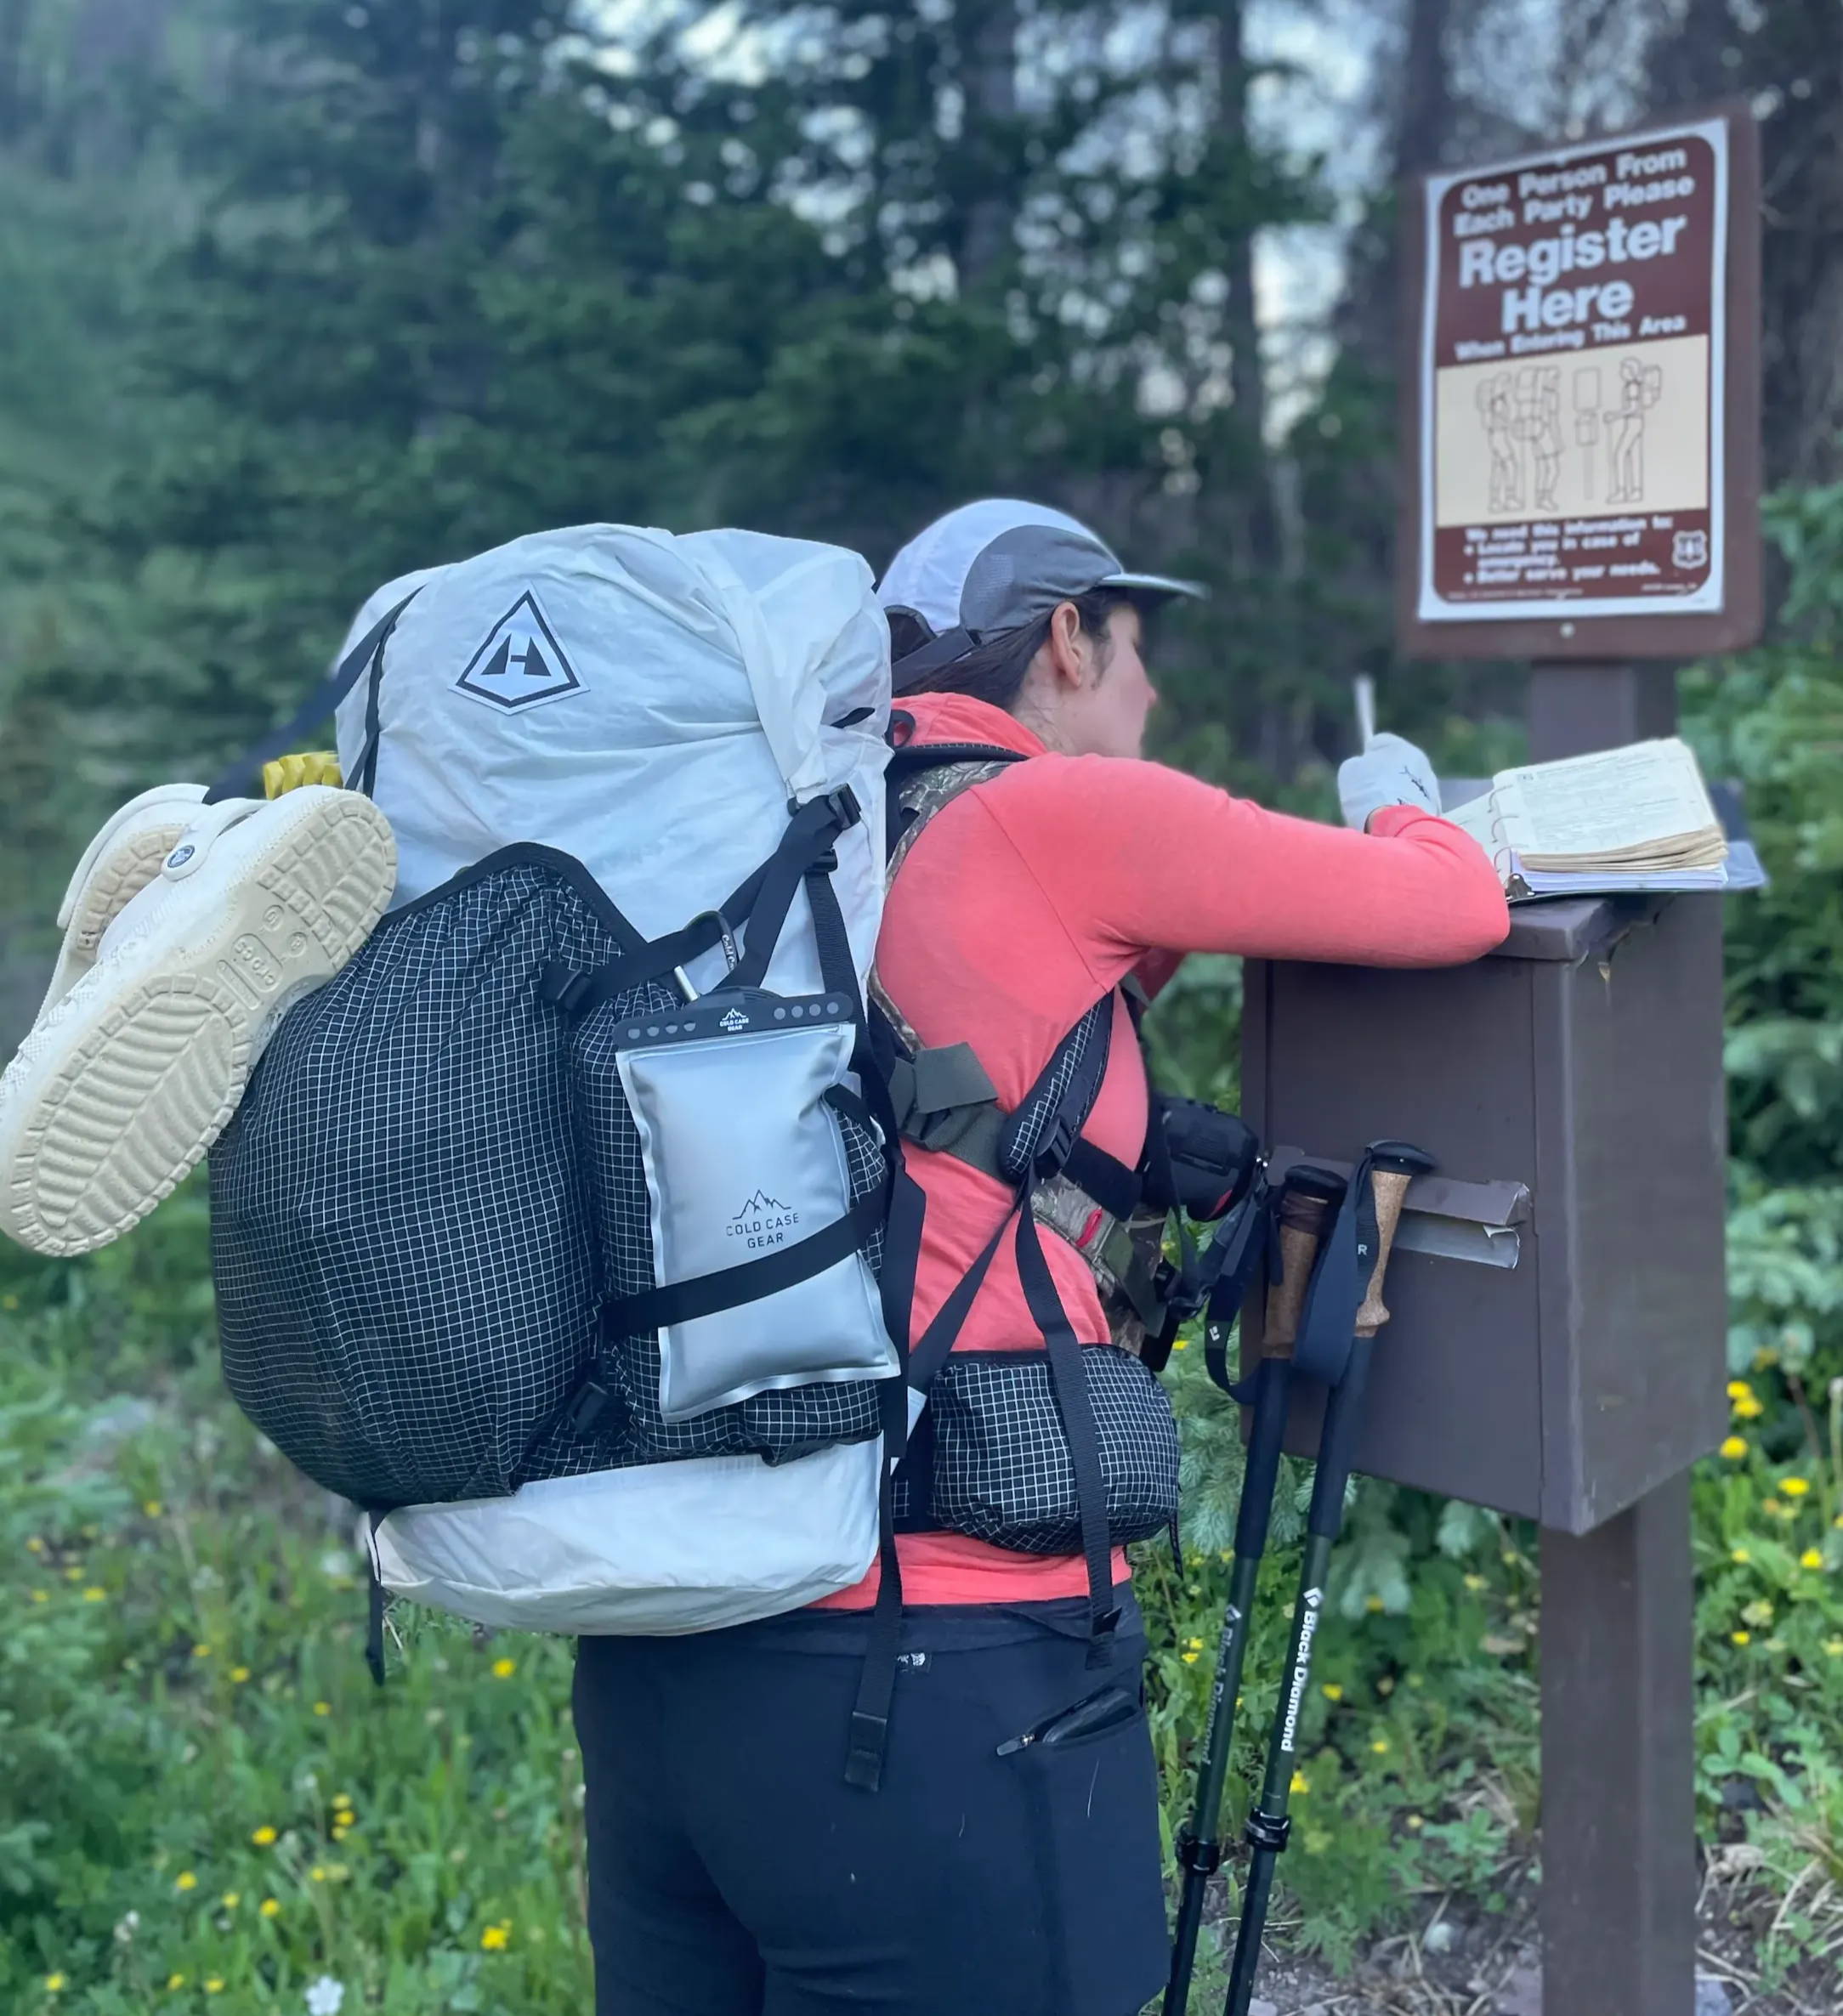 Backpacking Gear List: What to Bring on a Backpacking Trip